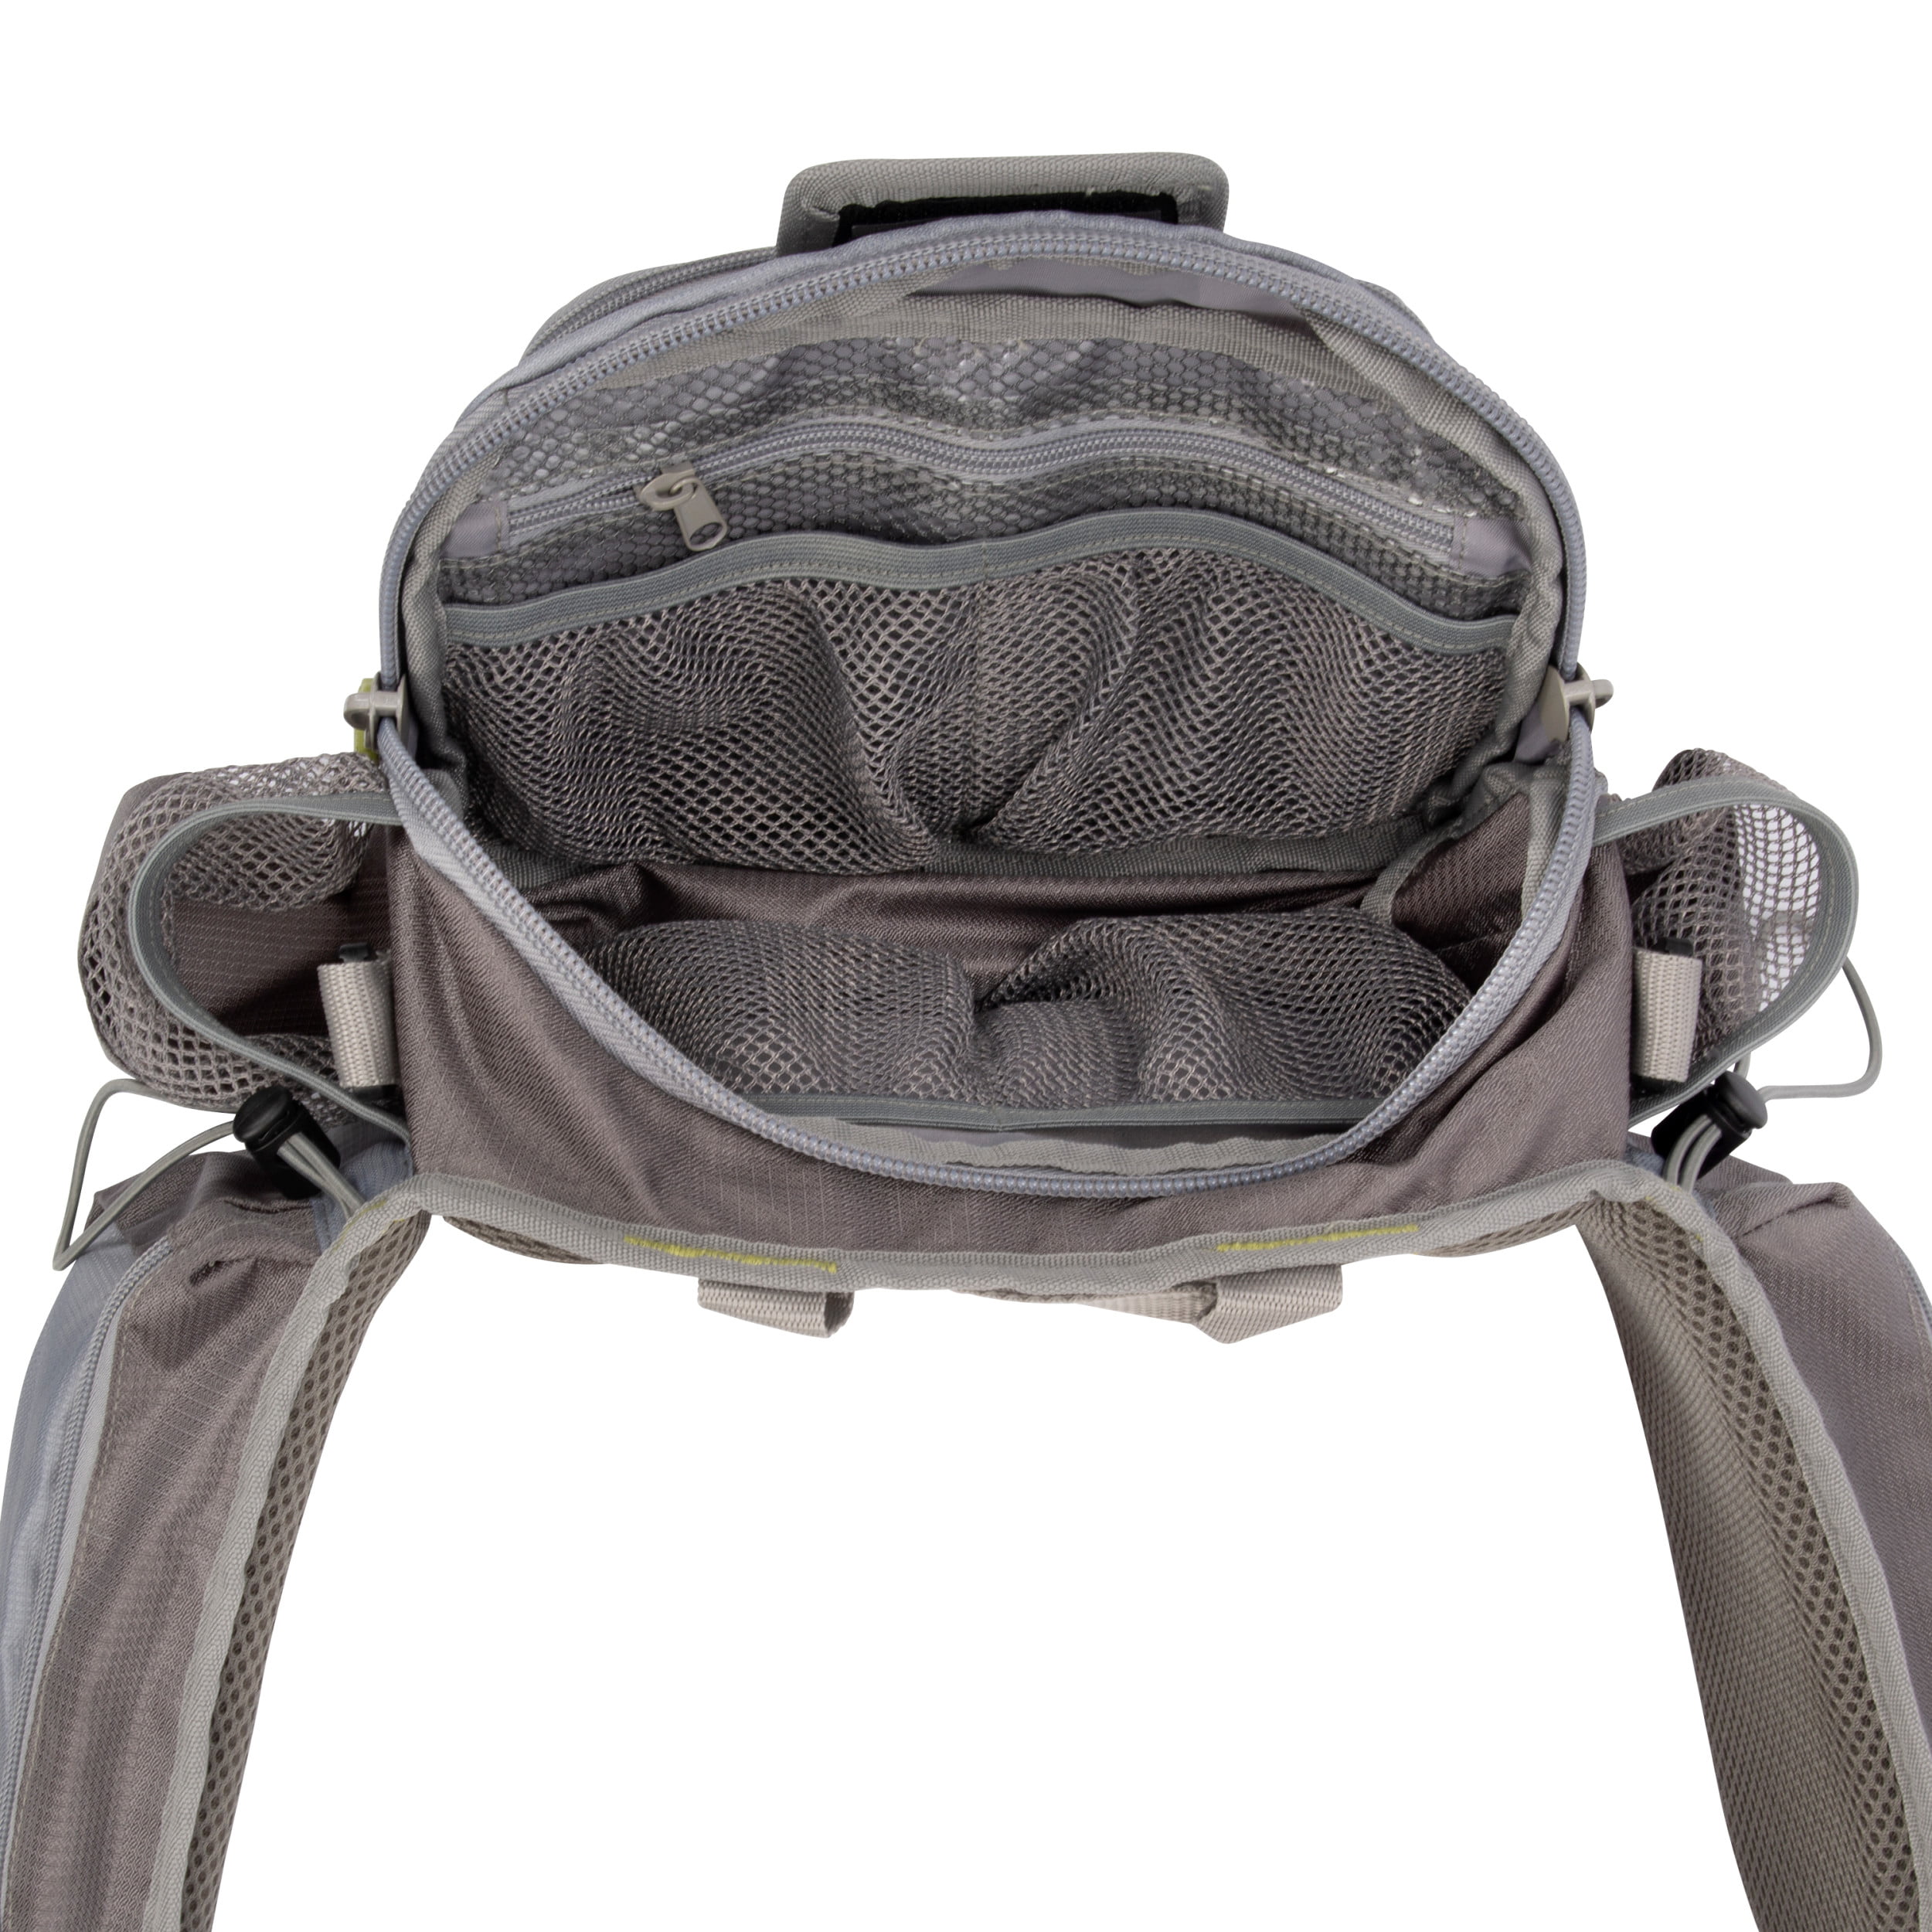 Allen Company Eagle River Lumbar Fly Fishing Pack, Gray/Lime 